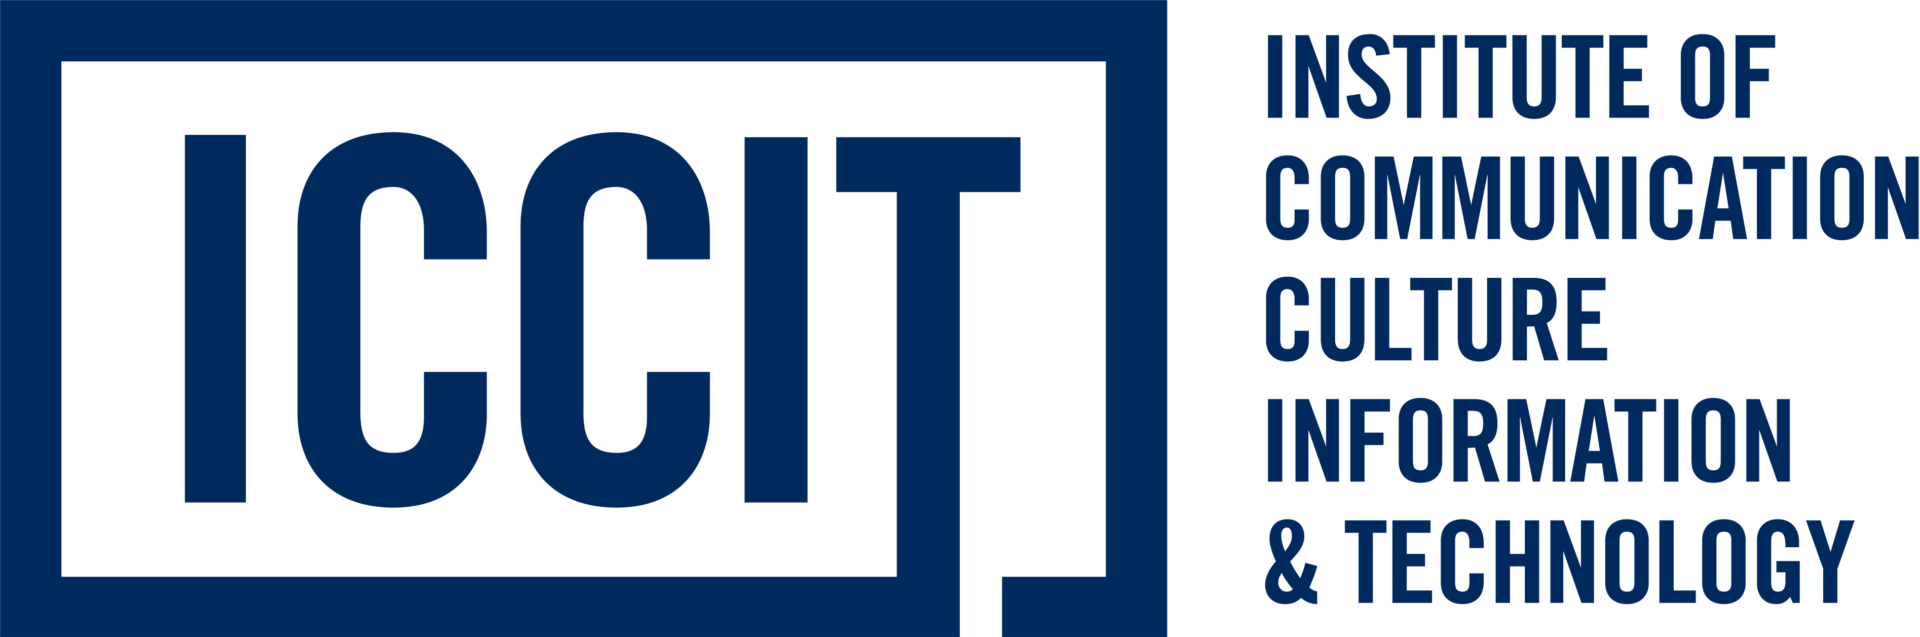 Institute of Communication Culture Information and Technology Logo